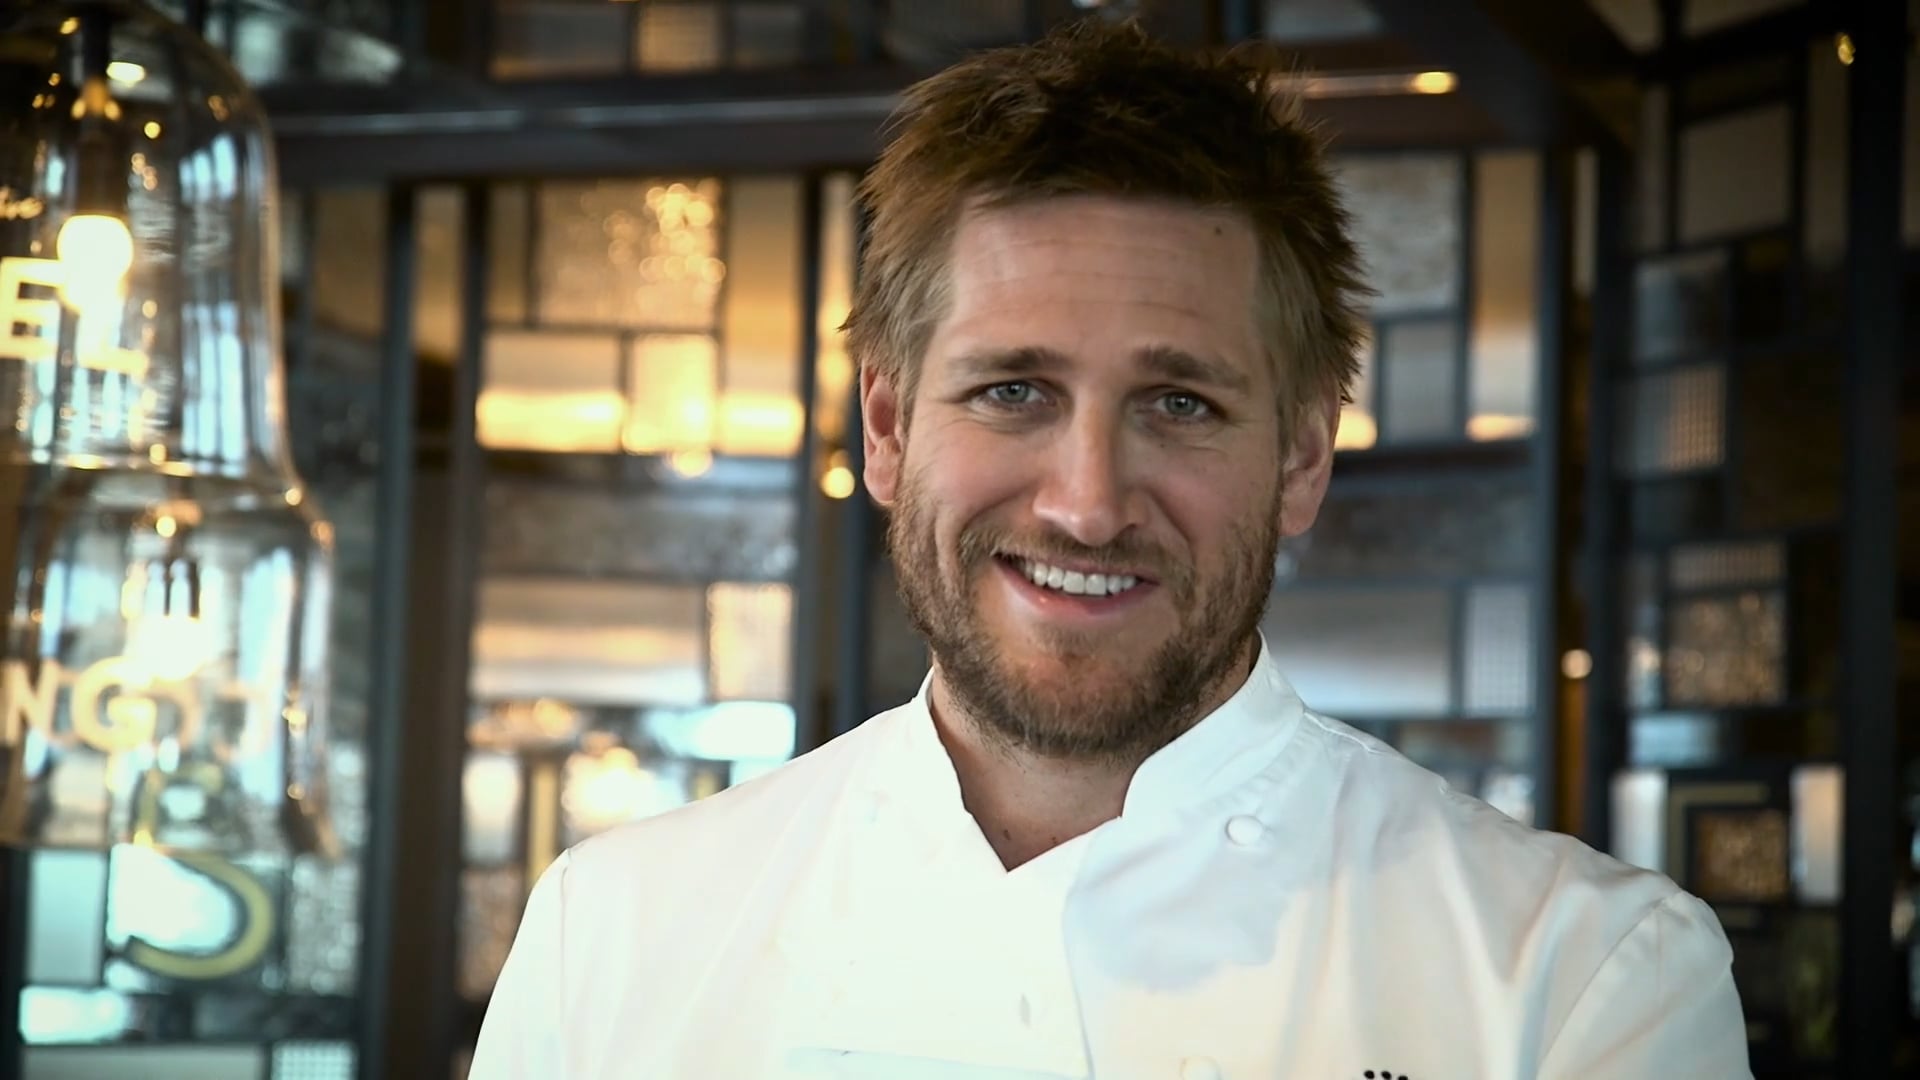 CURTIS STONE "Share"